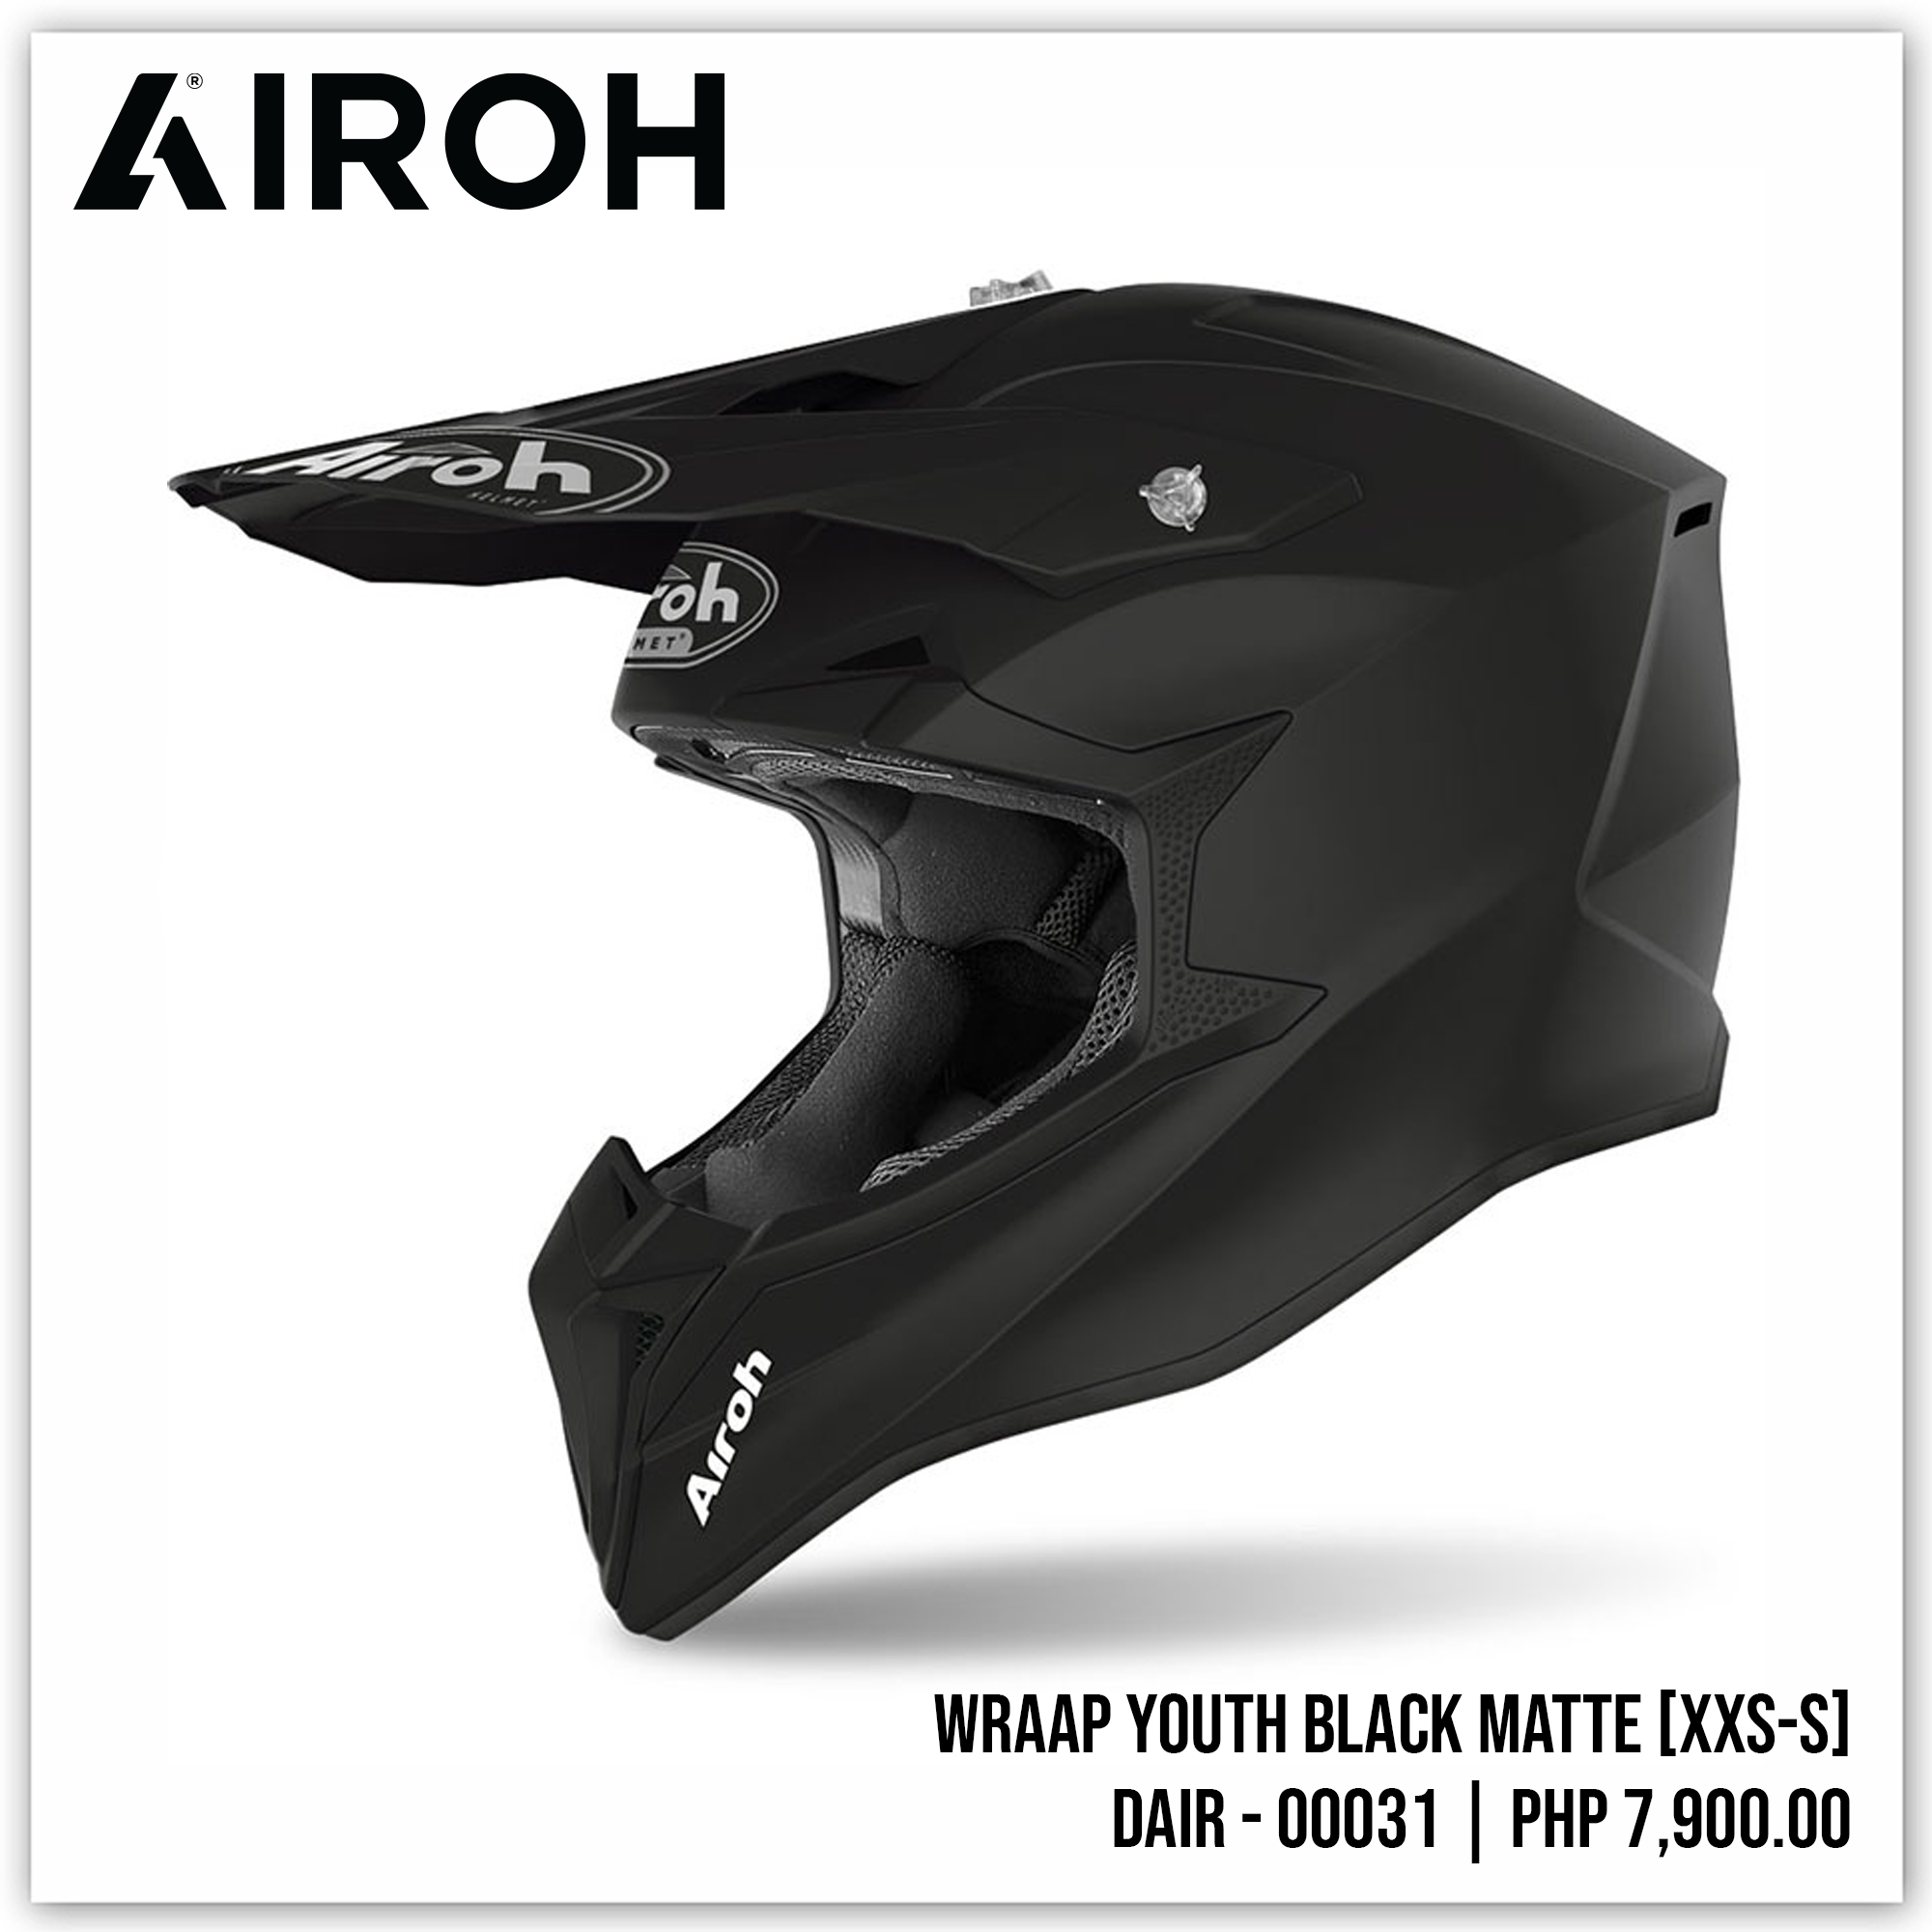 WRAAP YOUTH COLOR BLACK MATTE